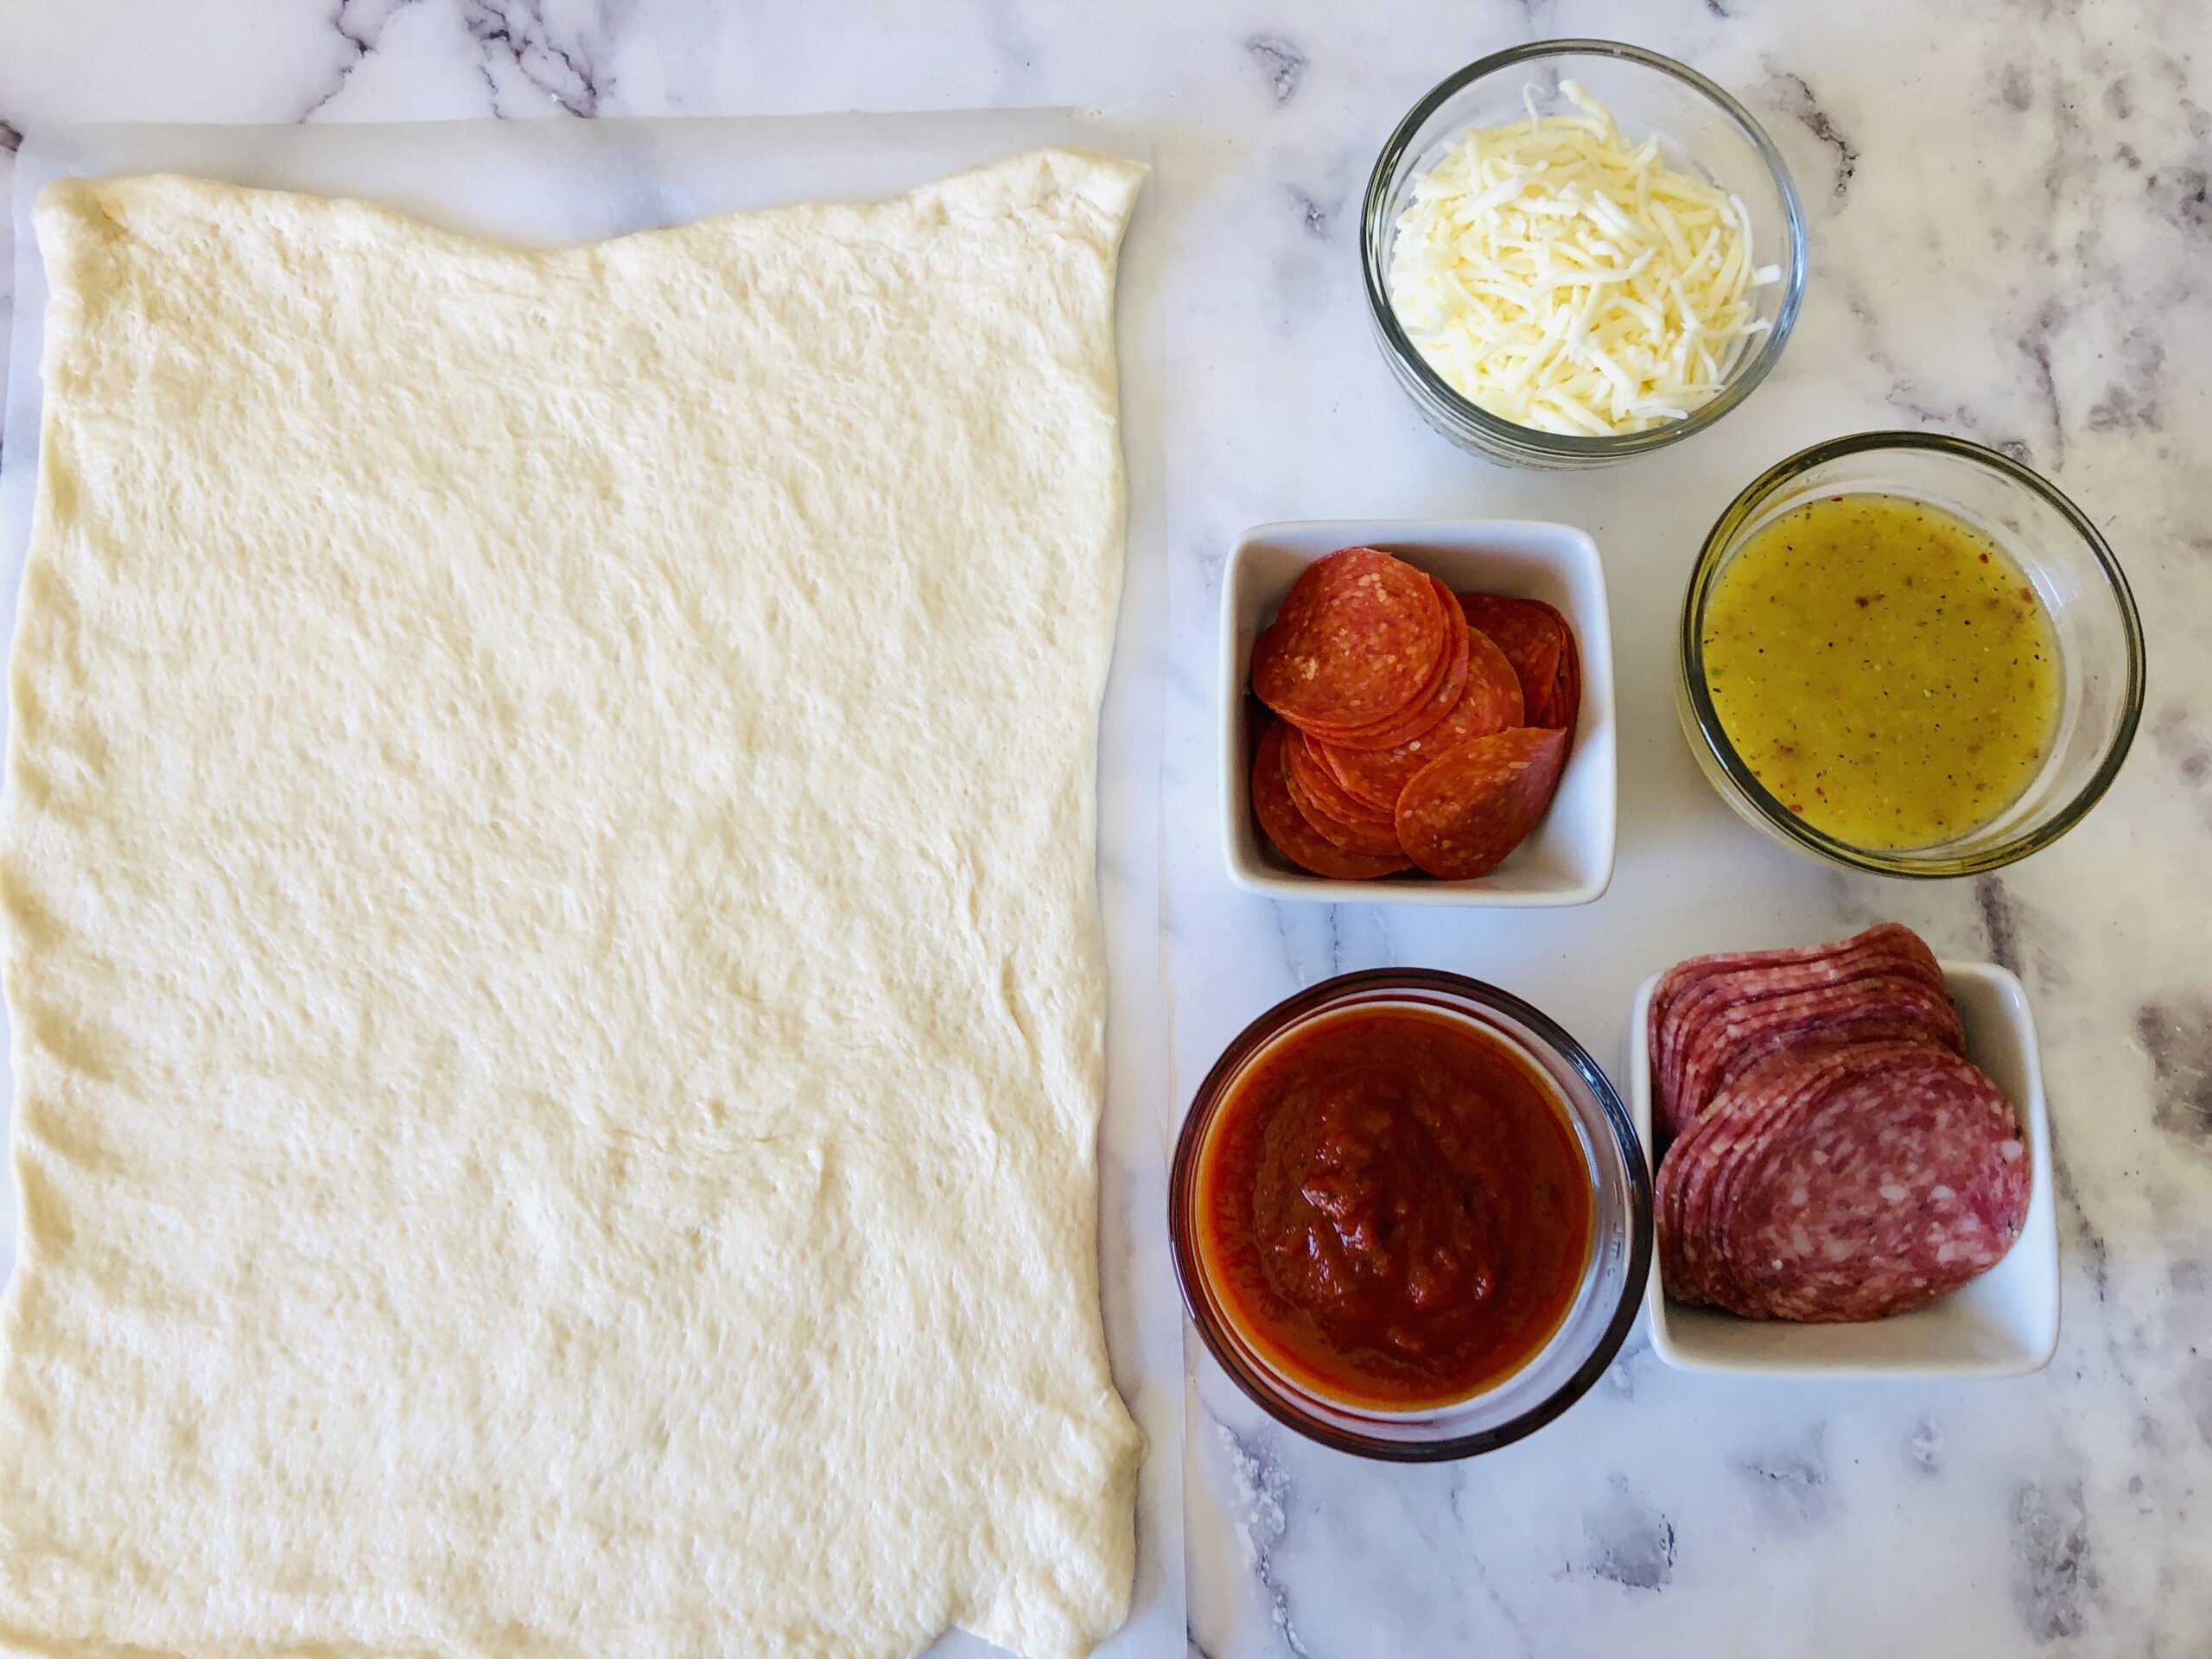 Ingredients for making Italian Stromboli displayed on a marble countertop, including dough, shredded cheese, pepperoni slices, salami, tomato sauce, and herb-infused oil.